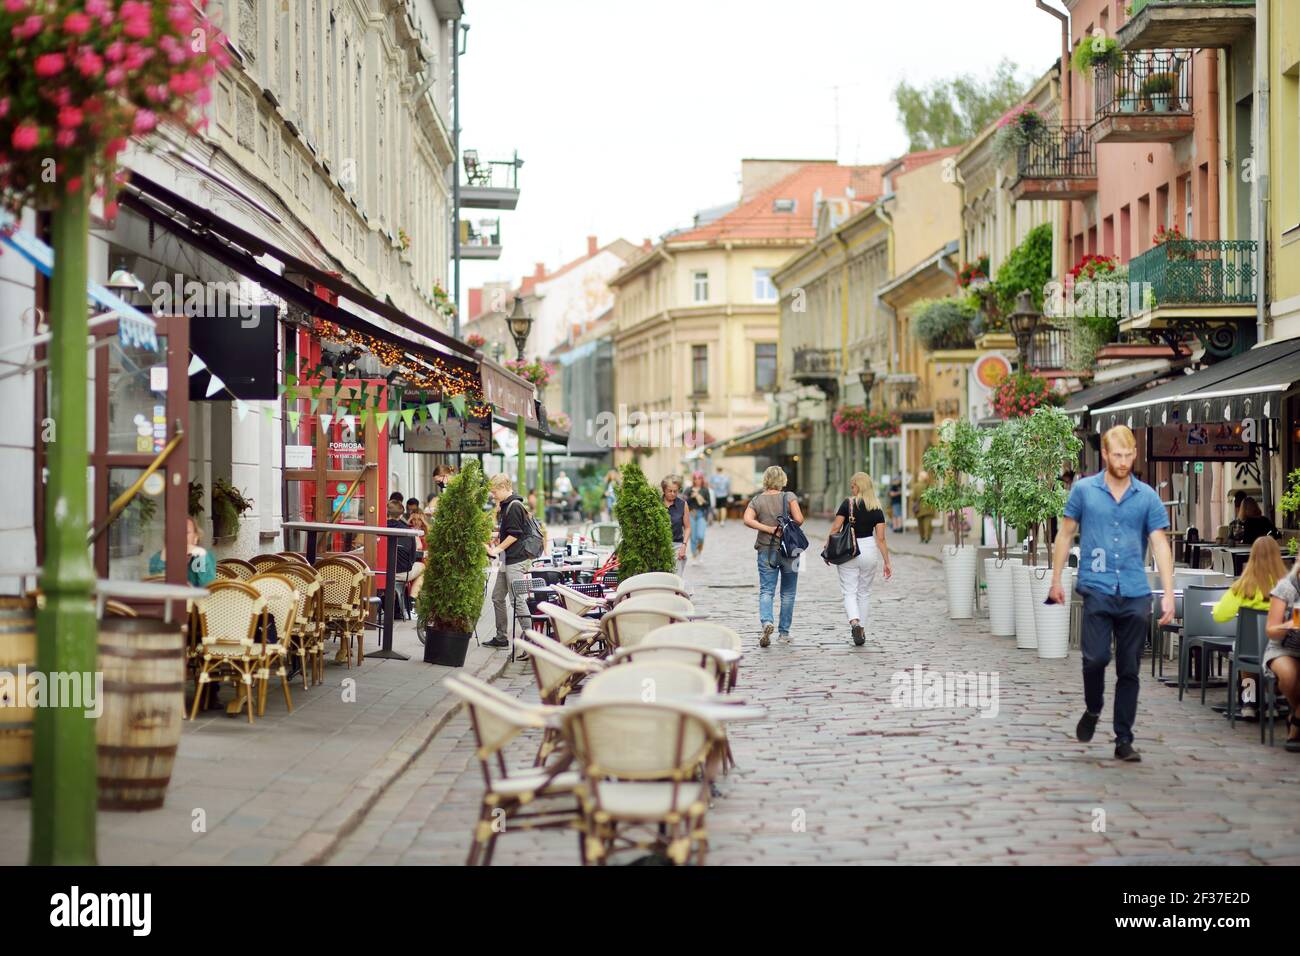 KAUNAS, LITHUANIA - AUGUST 16, 2020: Townspeople and tourists strolling on the Vilnius street (Vilniaus gatve) in medieval Kaunas old town. Stock Photo